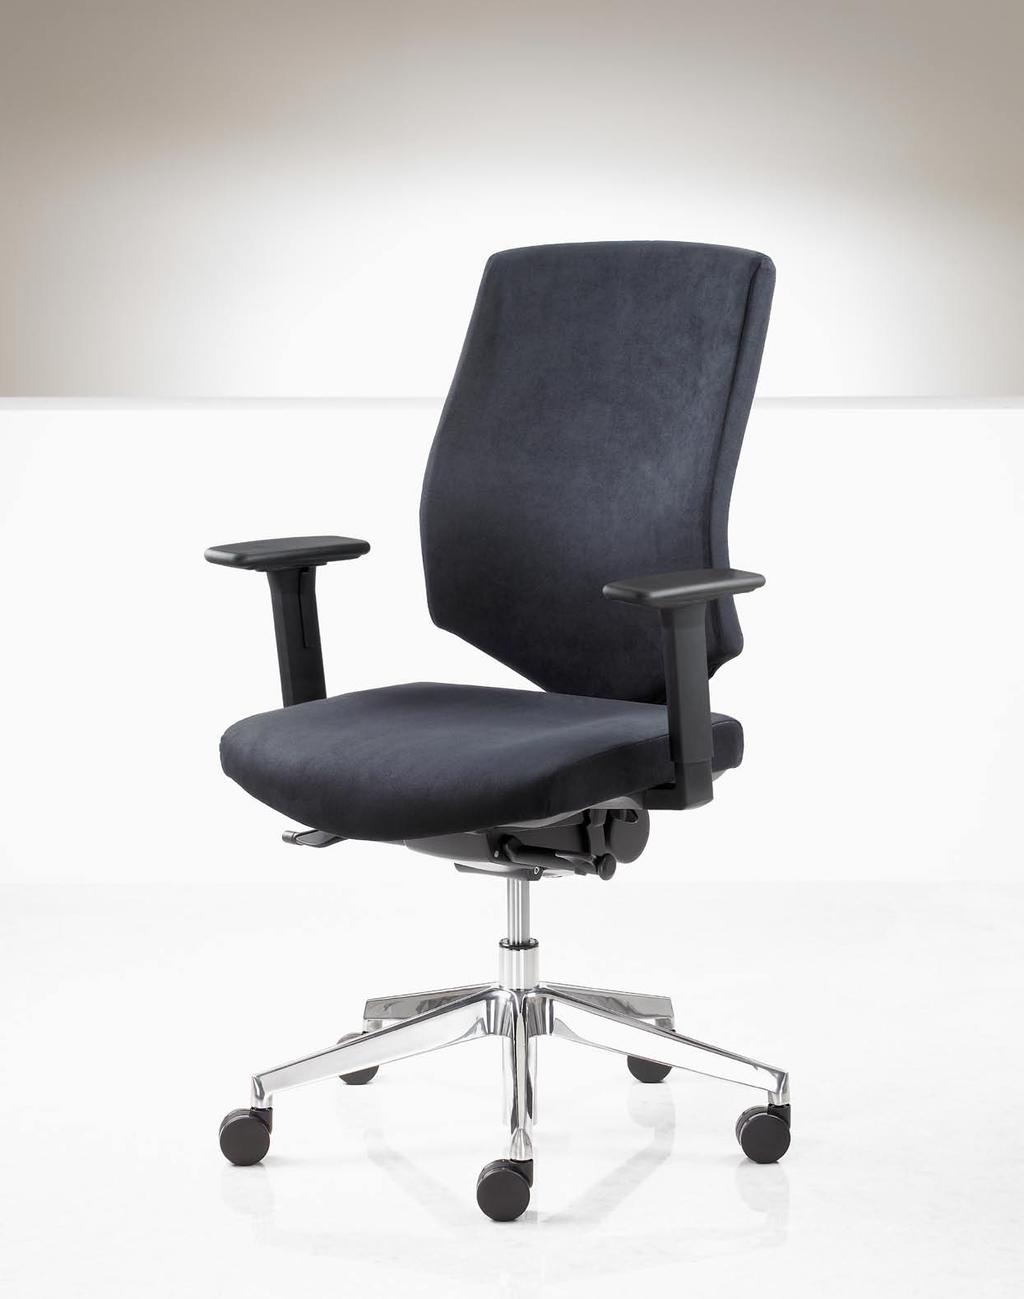 An inflatable lumbar support and two-tone seat/back upholstery are both available as options.